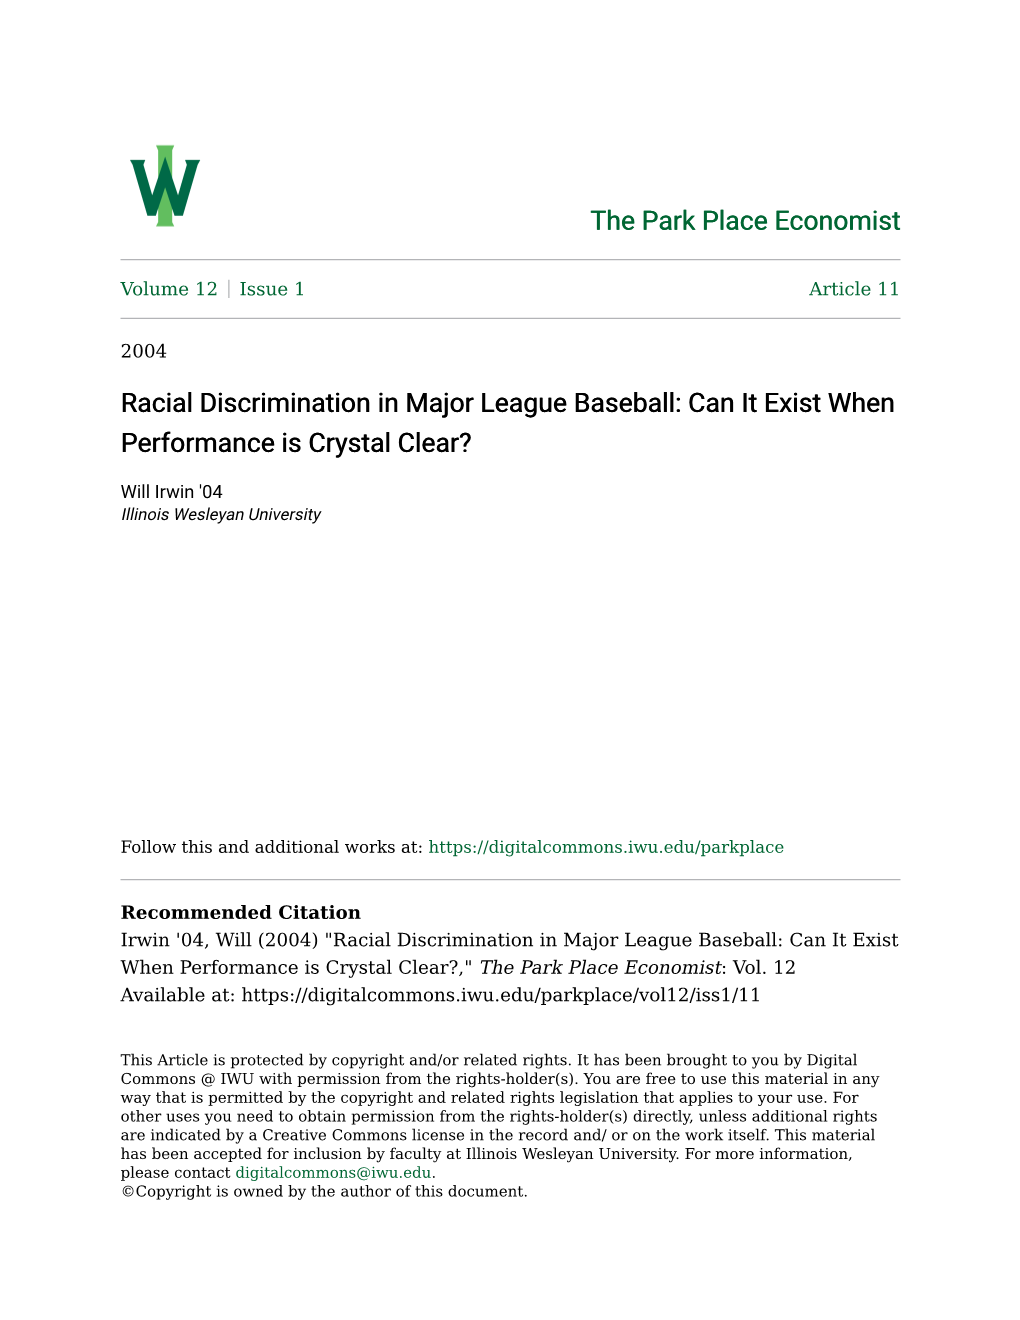 Racial Discrimination in Major League Baseball: Can It Exist When Performance Is Crystal Clear?